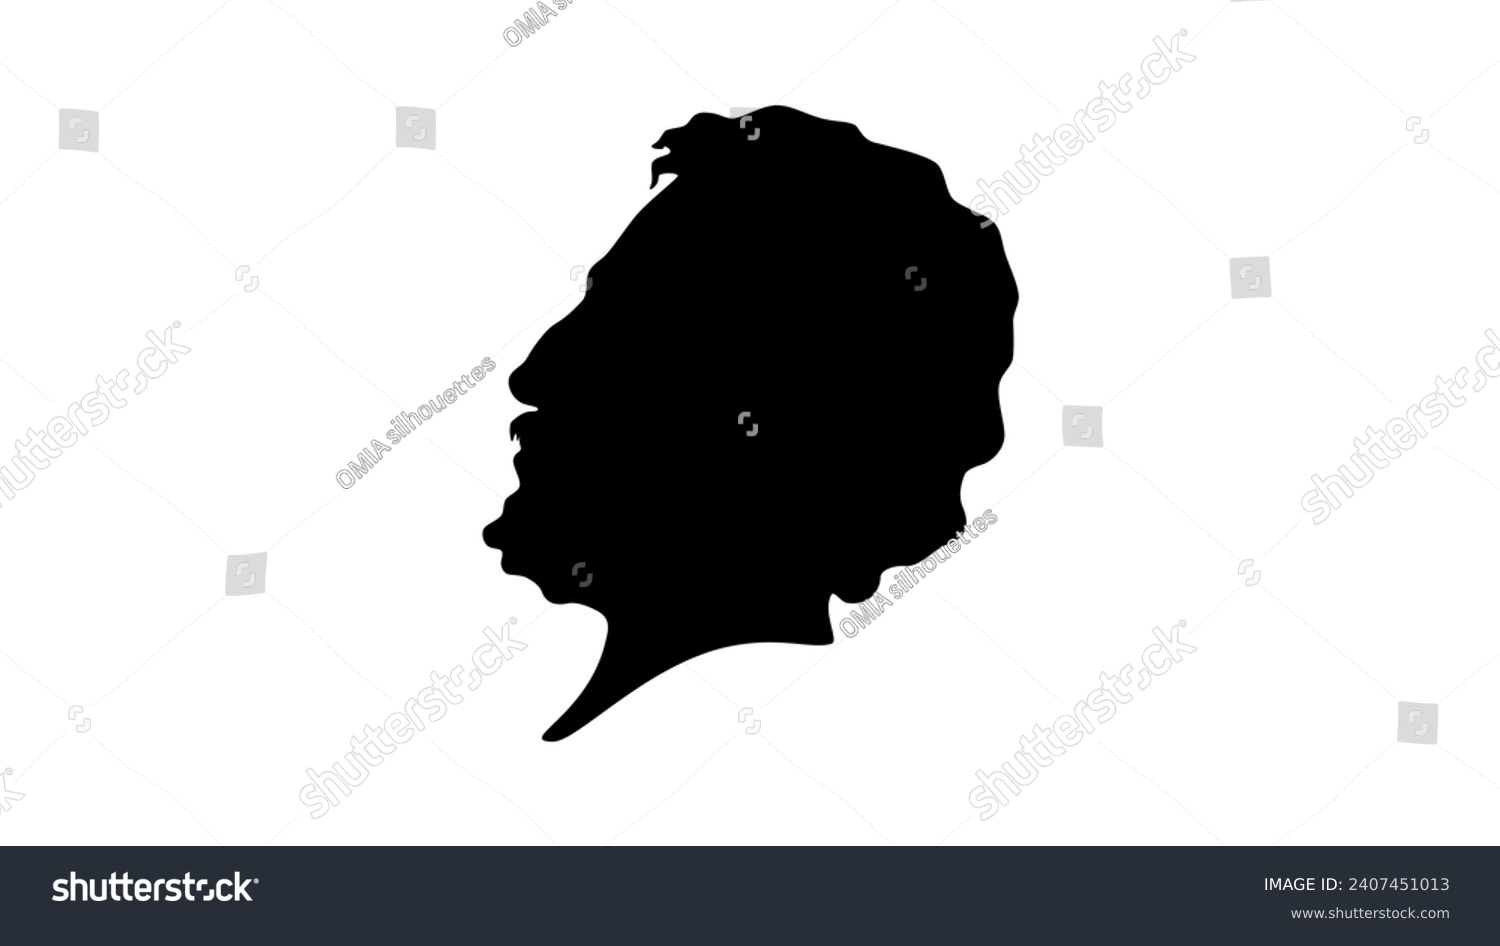 SVG of Speusippus ancient Greek philosopher, black isolated silhouette svg